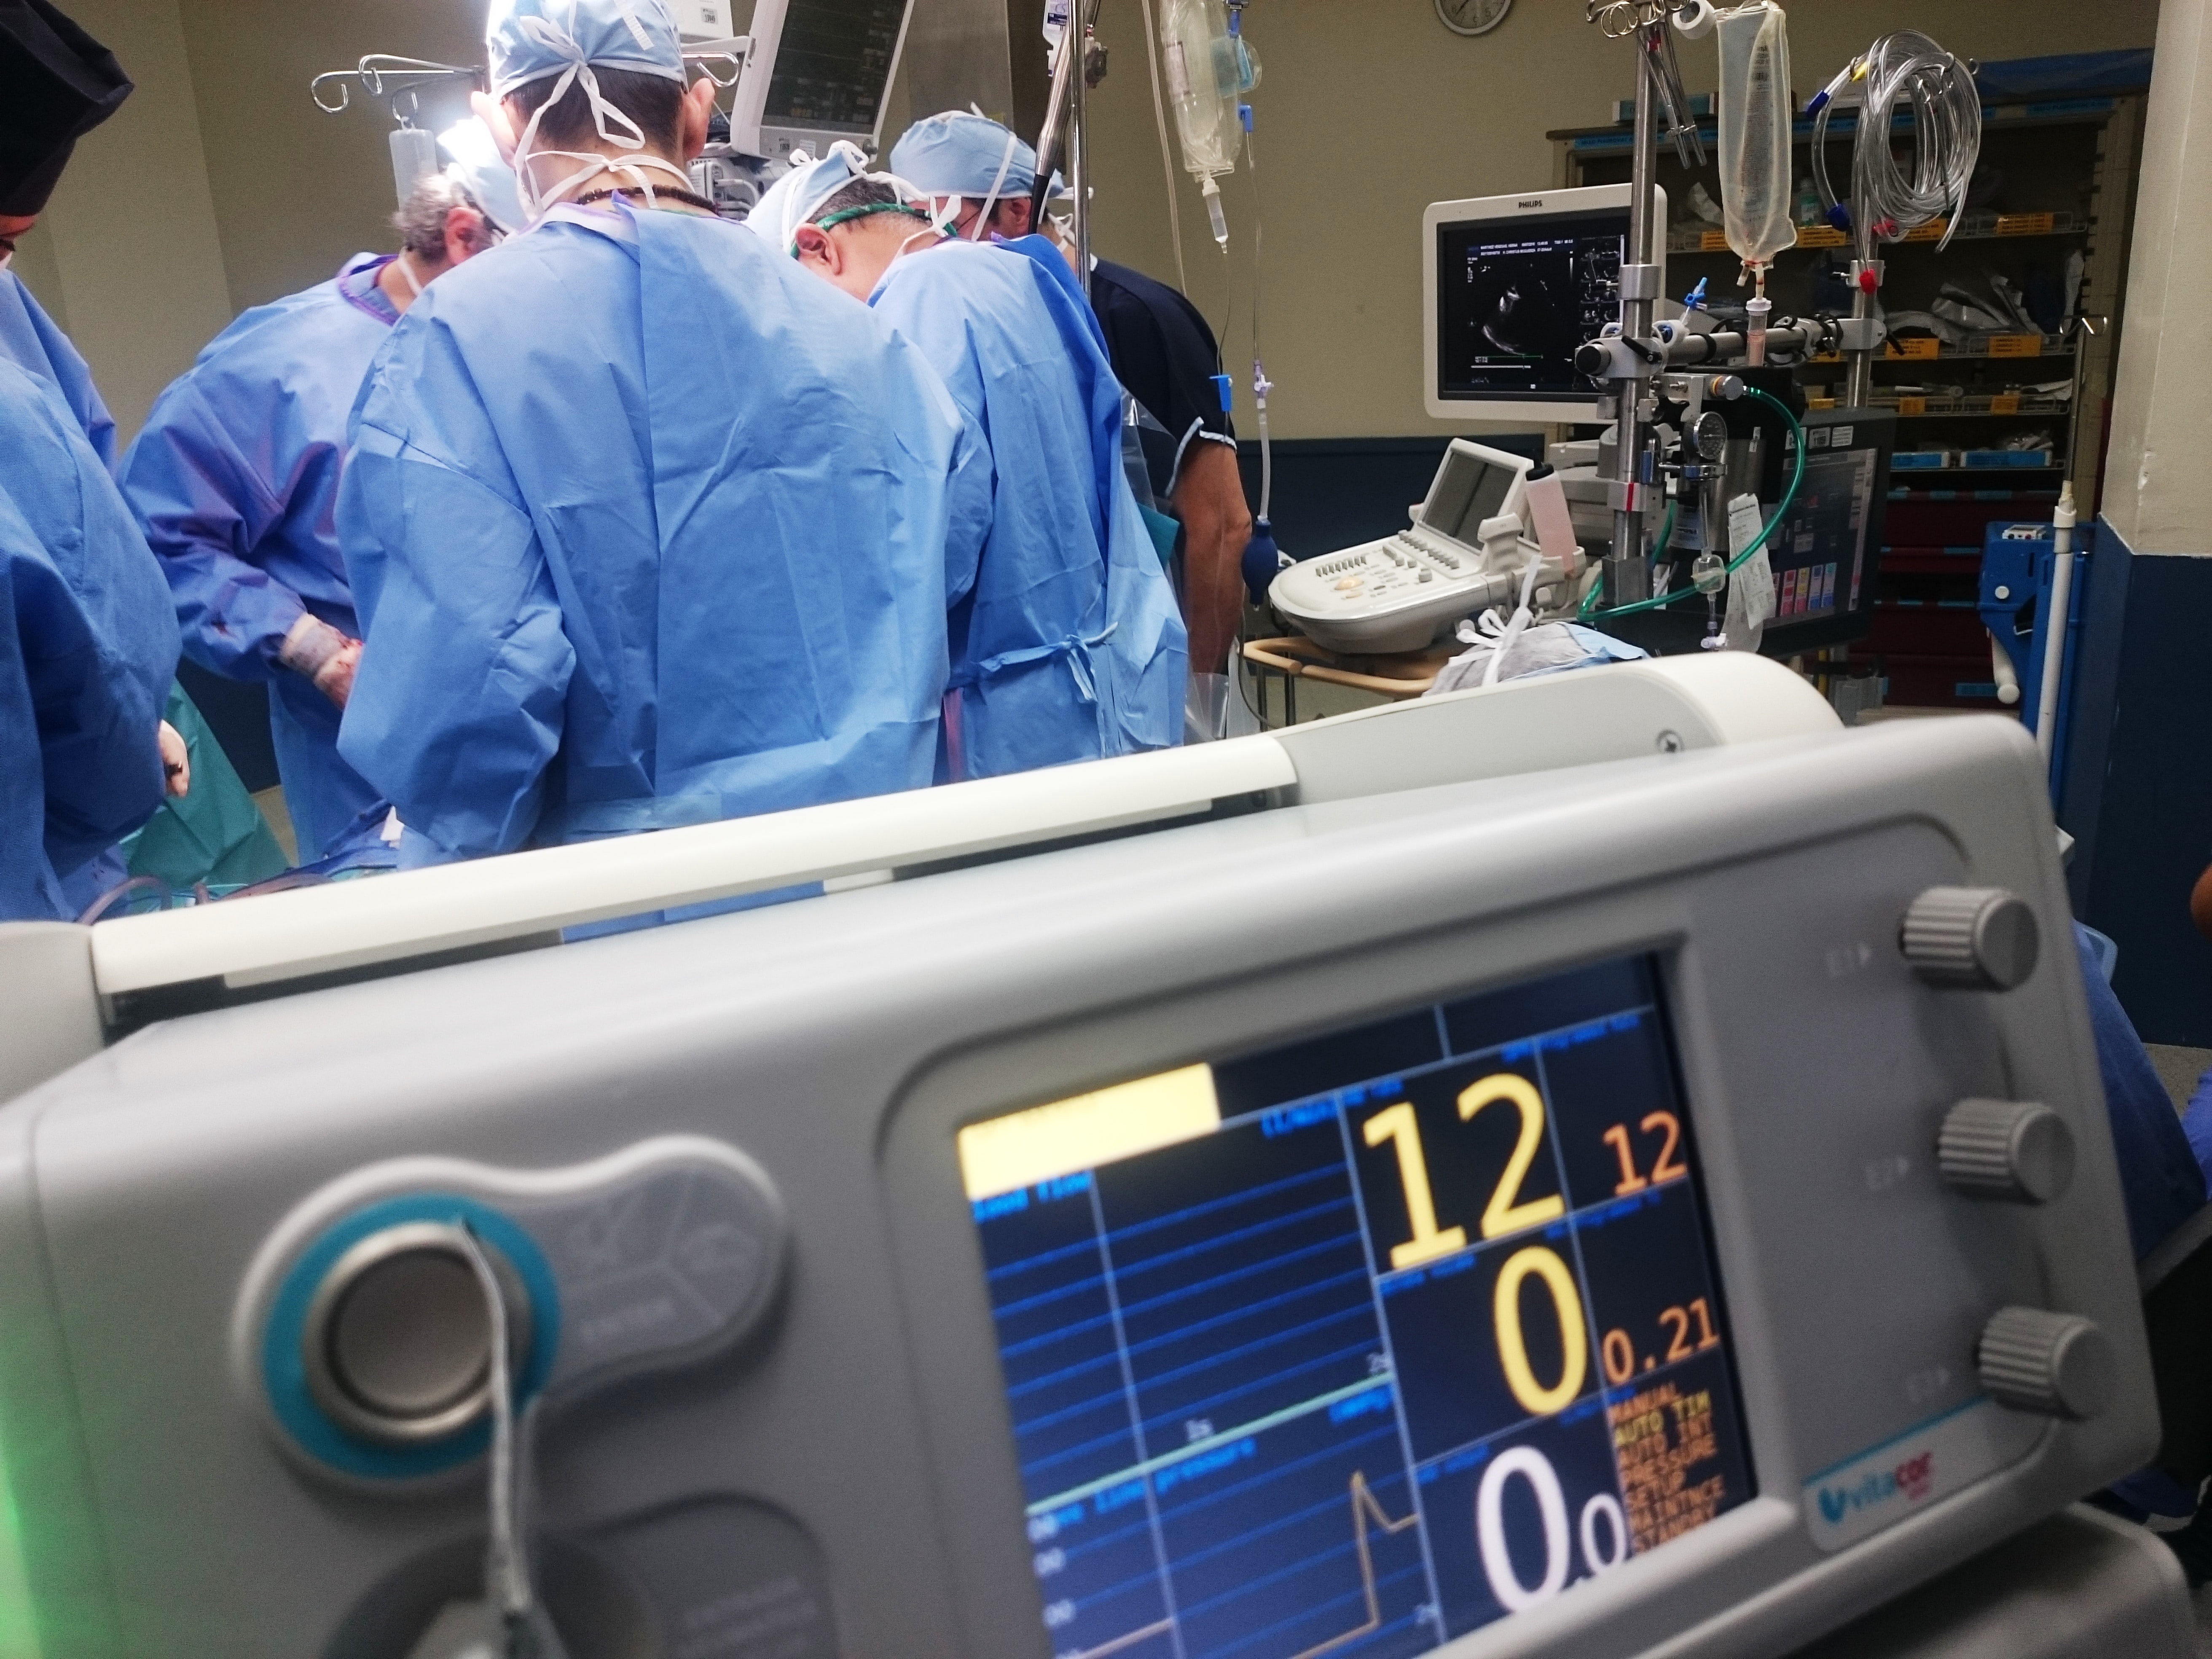 Improving Surgical Outcomes and Satisfaction at Scale